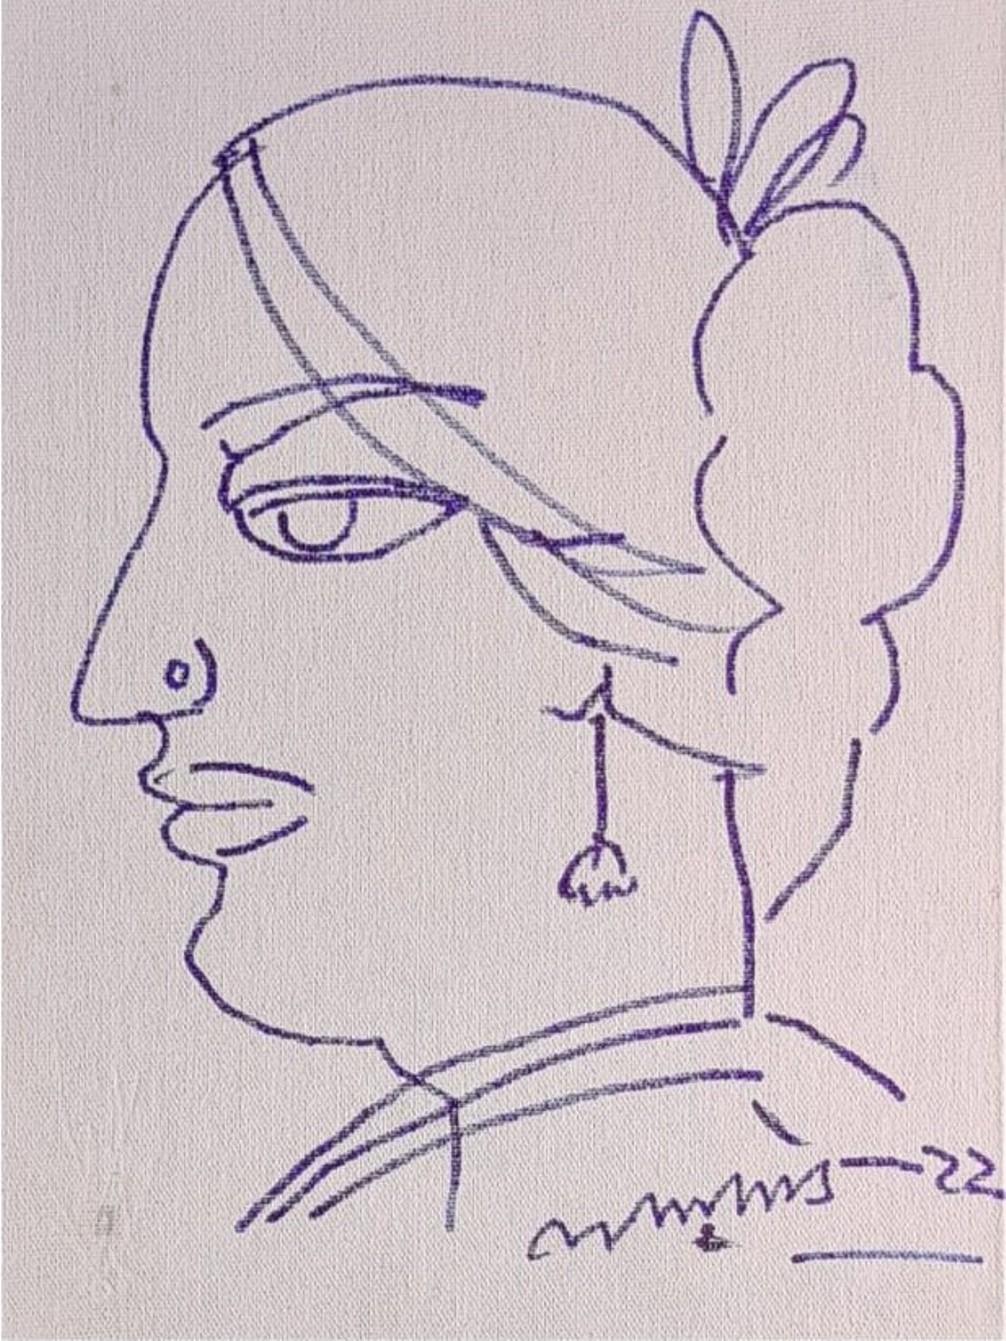 Lalu Prasad Shaw - Biwi  - 12 x 9 inches
Ink on Canvas Board, 2022
( Unframed & Delivered )

Style : Known widely for his highly stylized portraits of Bengali women and couples, Lalu Prasad Shaw’s works lay the most emphasis on his subject’s